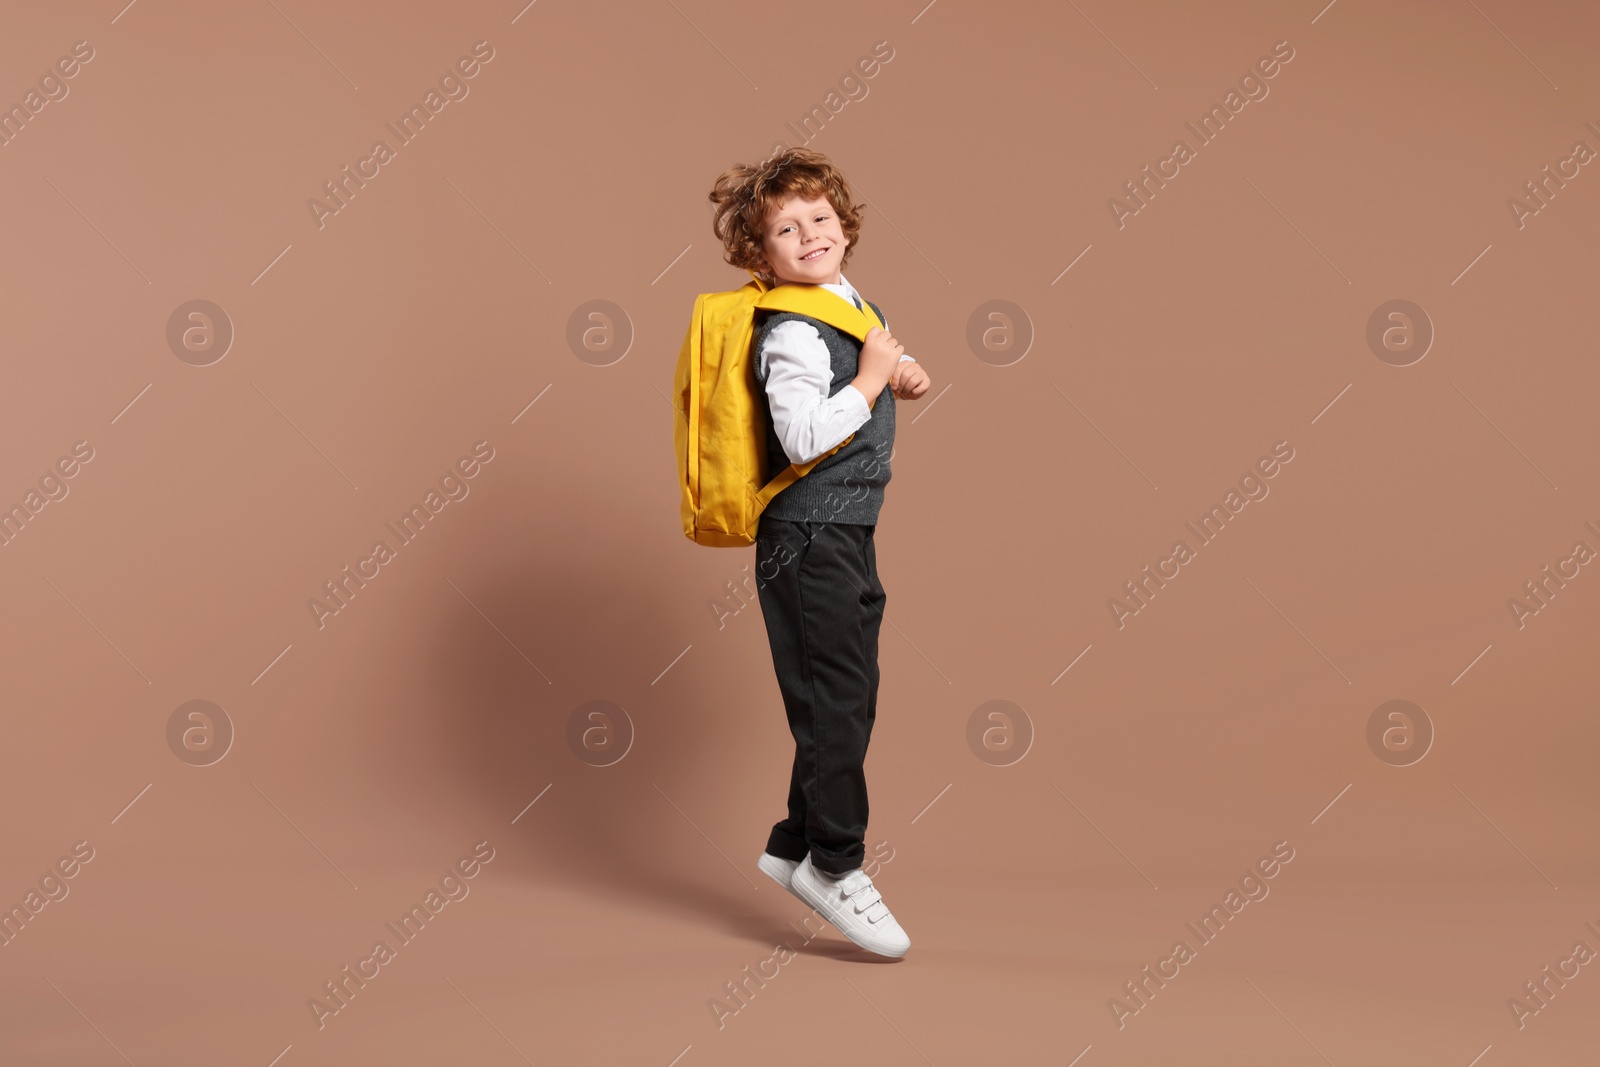 Photo of Happy schoolboy with backpack jumping on brown background